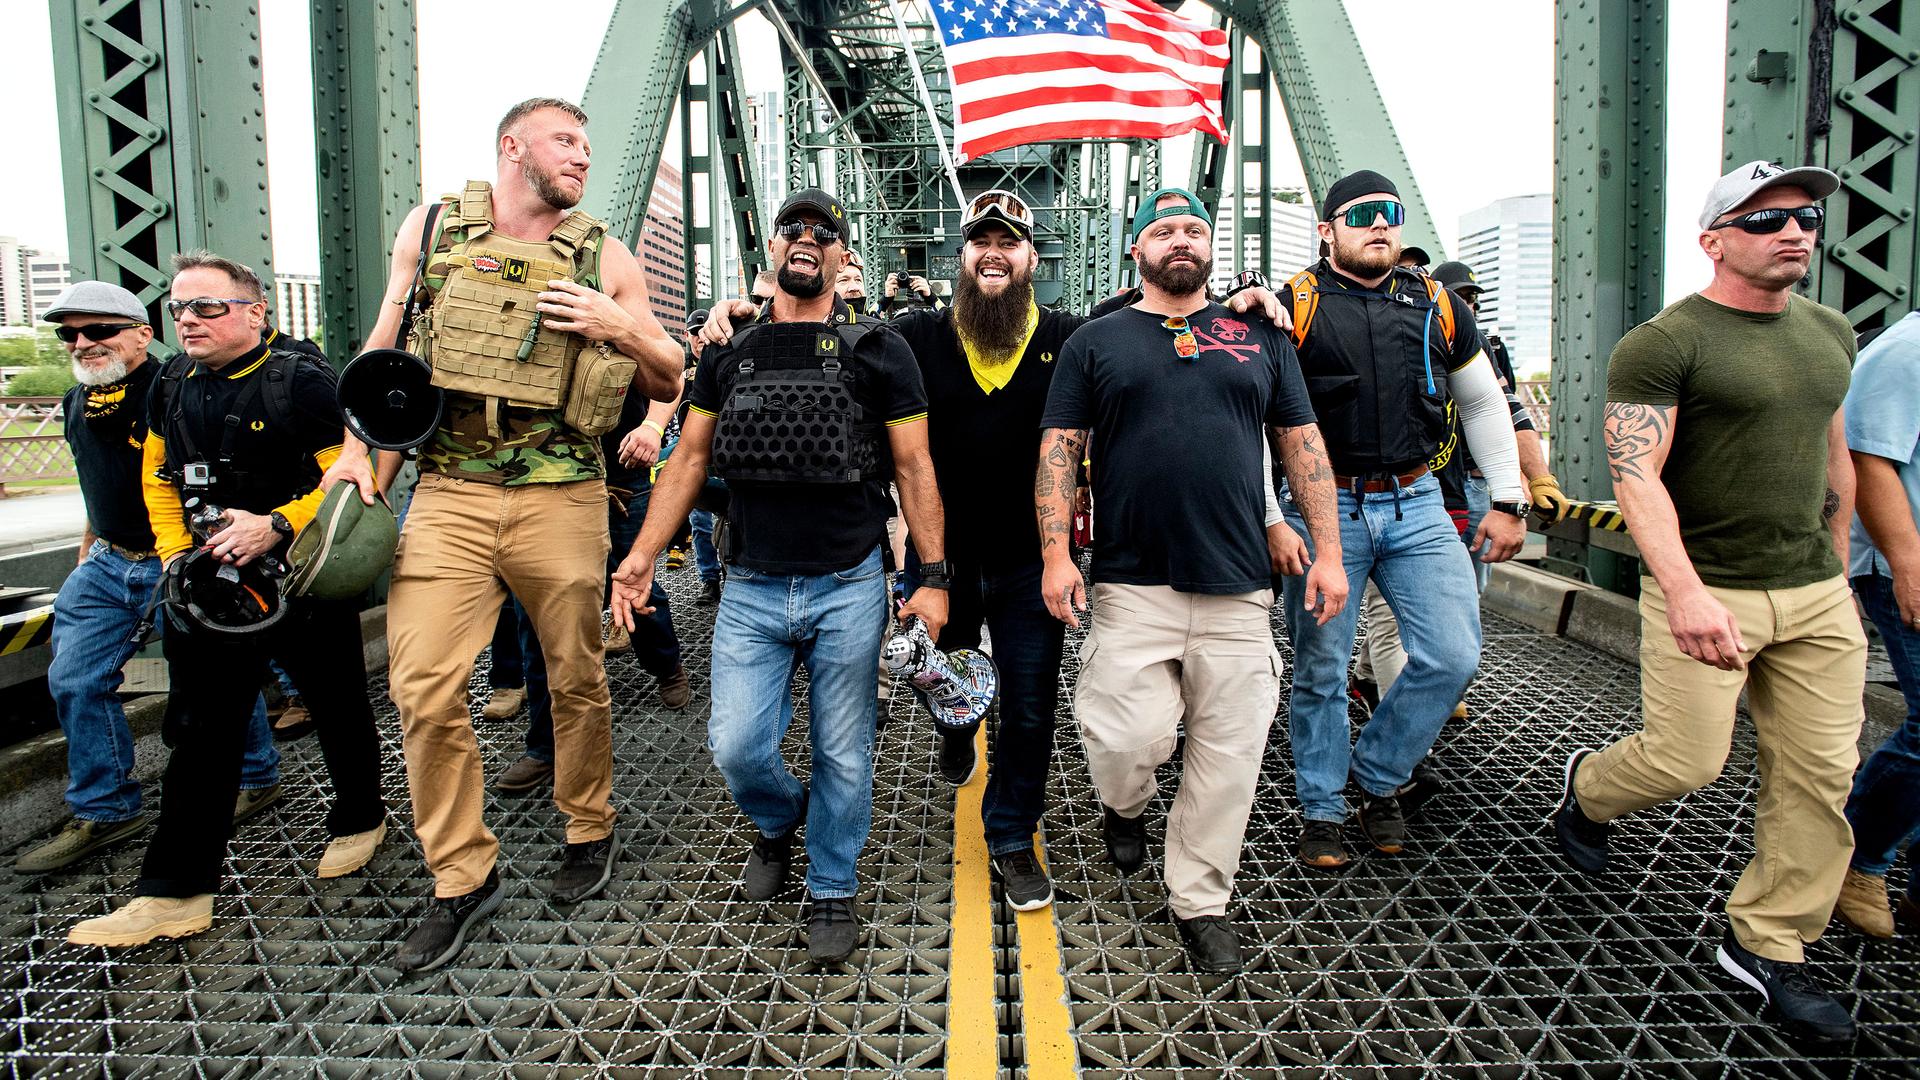 Members of the Proud Boys and other right-wing demonstrators march across the Hawthorne Bridge during an 